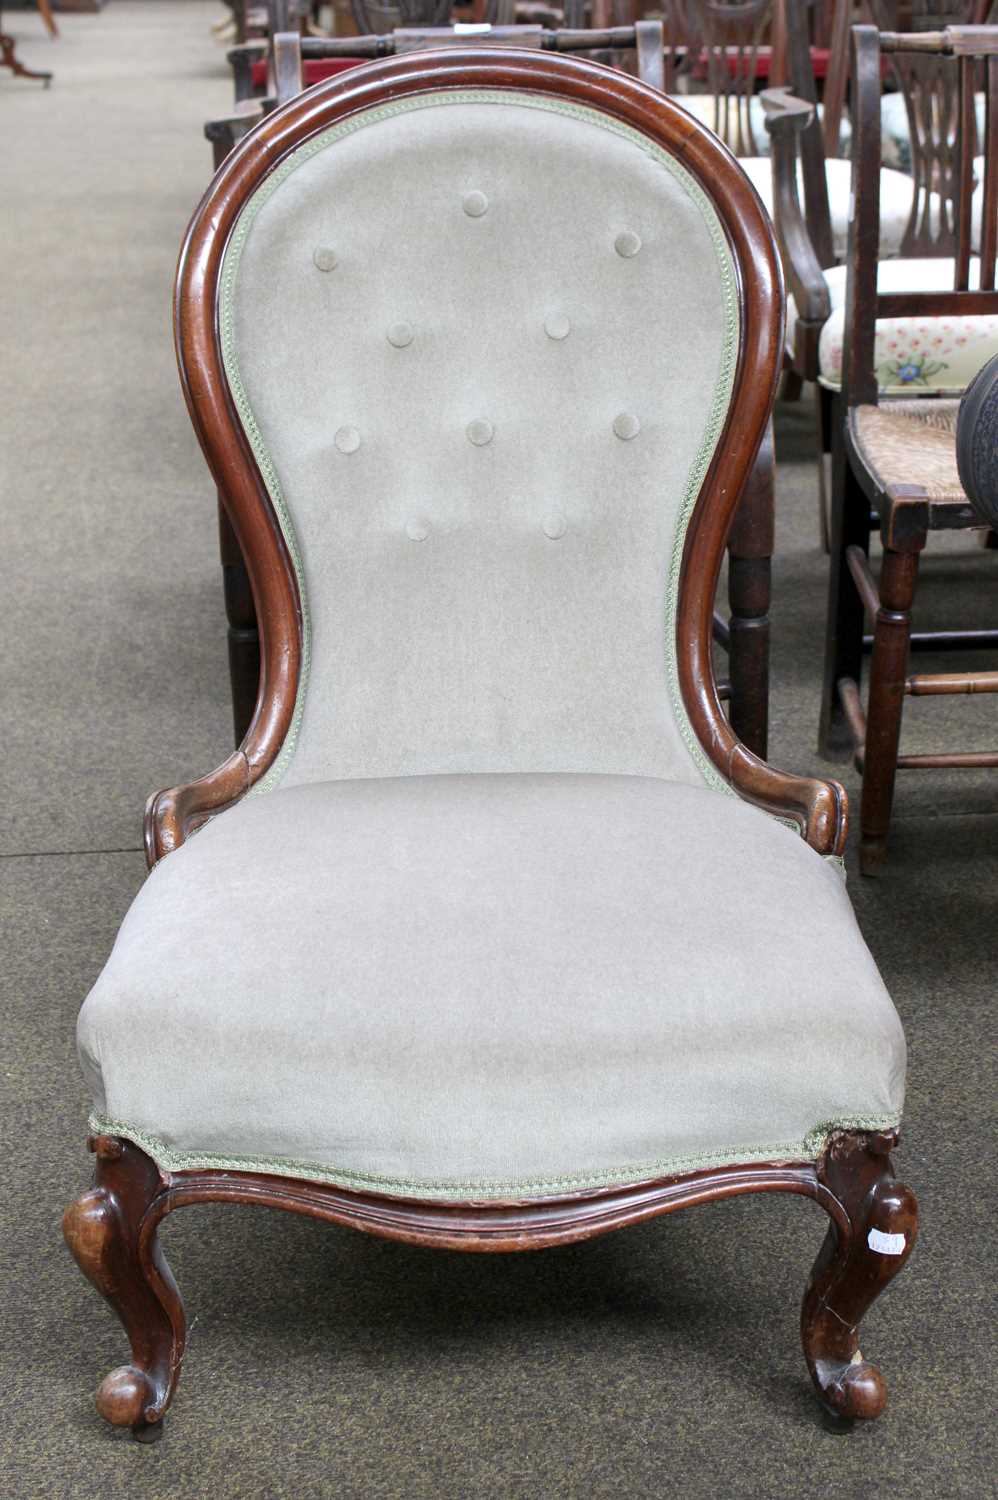 A Victorian Mahogany Spoon Back Nursing Chair, with button upholstery and scroll supports - Image 2 of 2